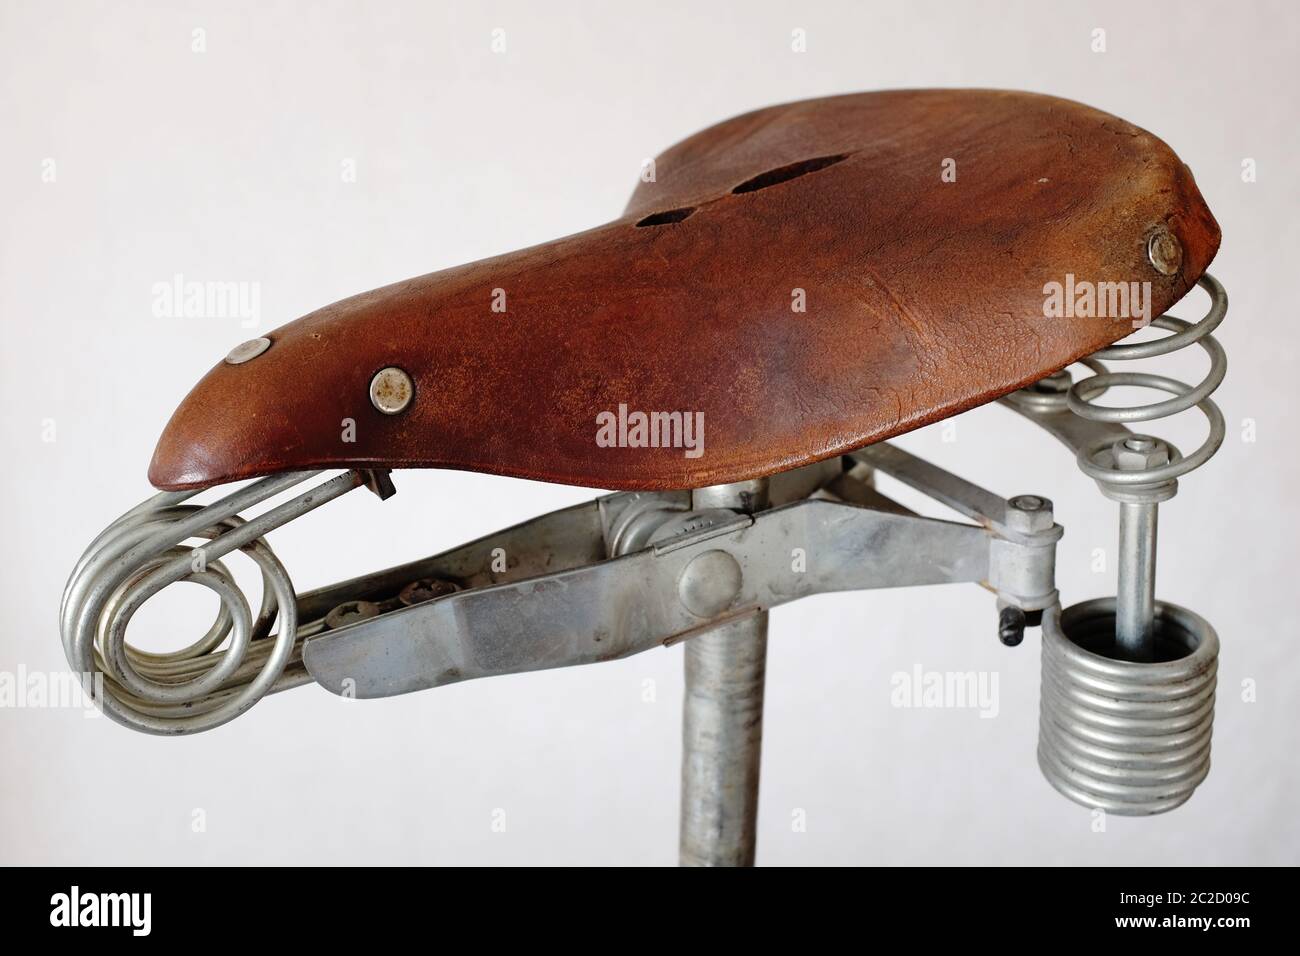 Details about   Retro Comfort Bike Seat,Vintage Classic Style Bicycle Spring Saddle,Leather Seat 